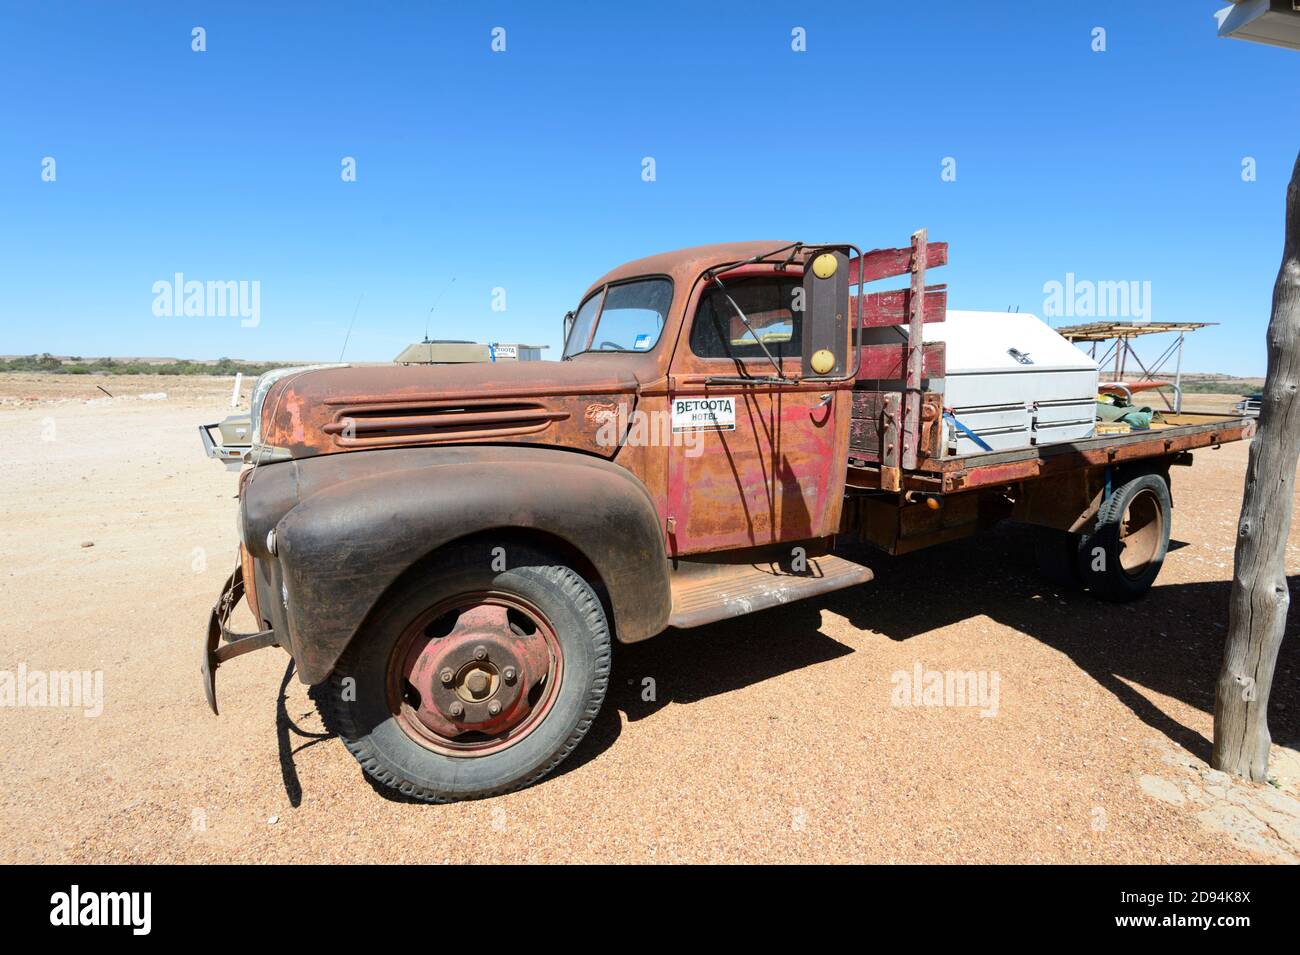 An old rusty Ford truck is part of the memorabilia at the Betoota Hotel, an old renowned Outback pub in the Ghost town of Betoota, Diamantina Shire, Q Stock Photo